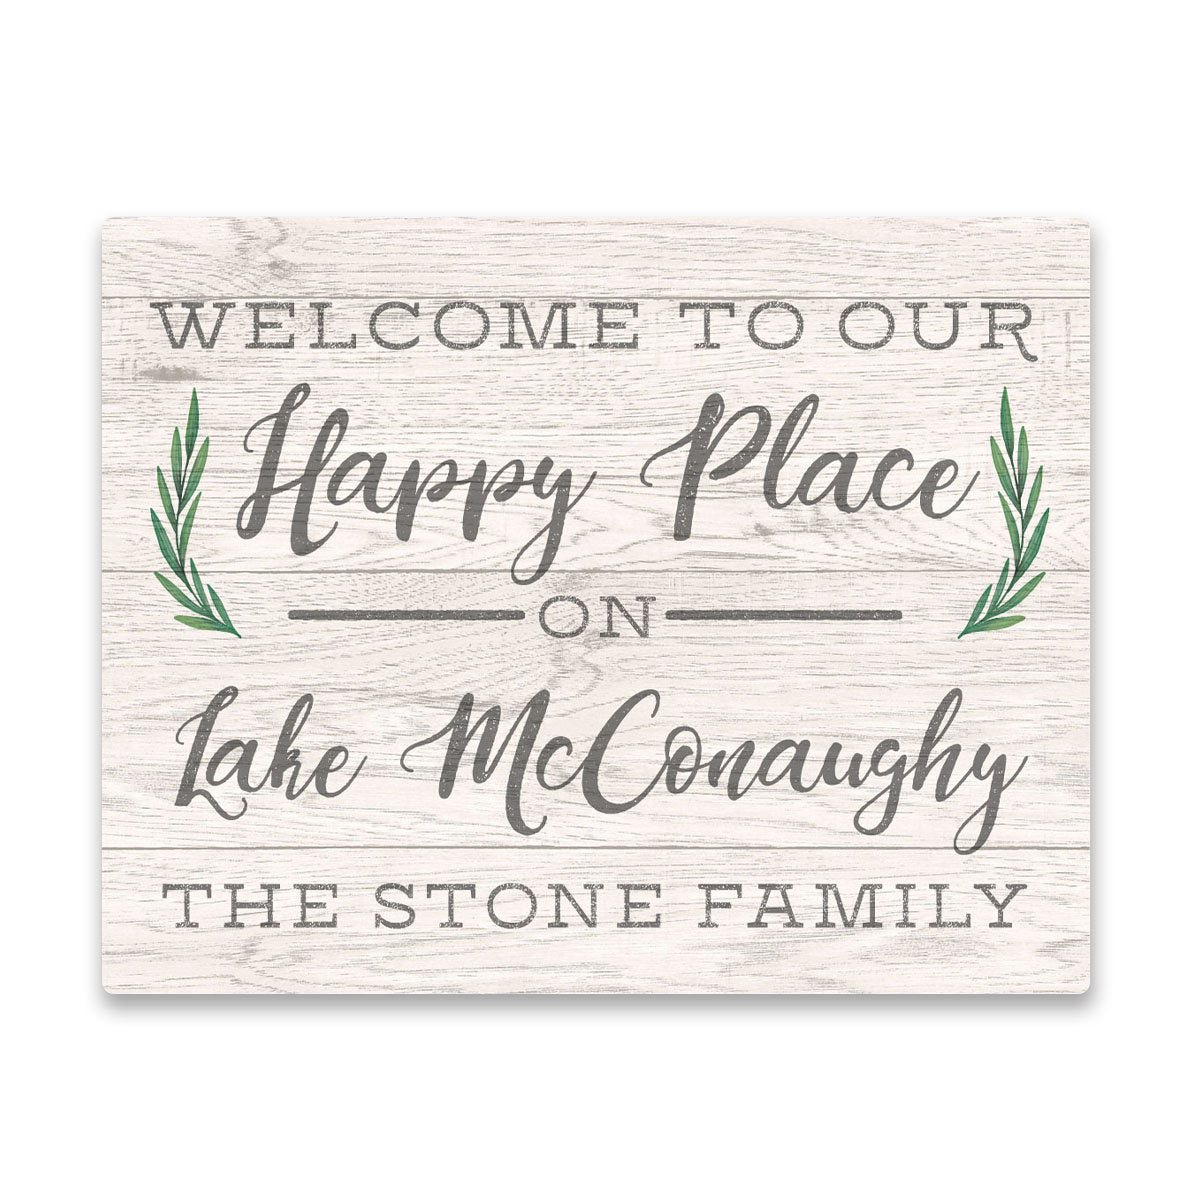 Personalized Welcome to Our Happy Place on Lake McConaughy Wall Art